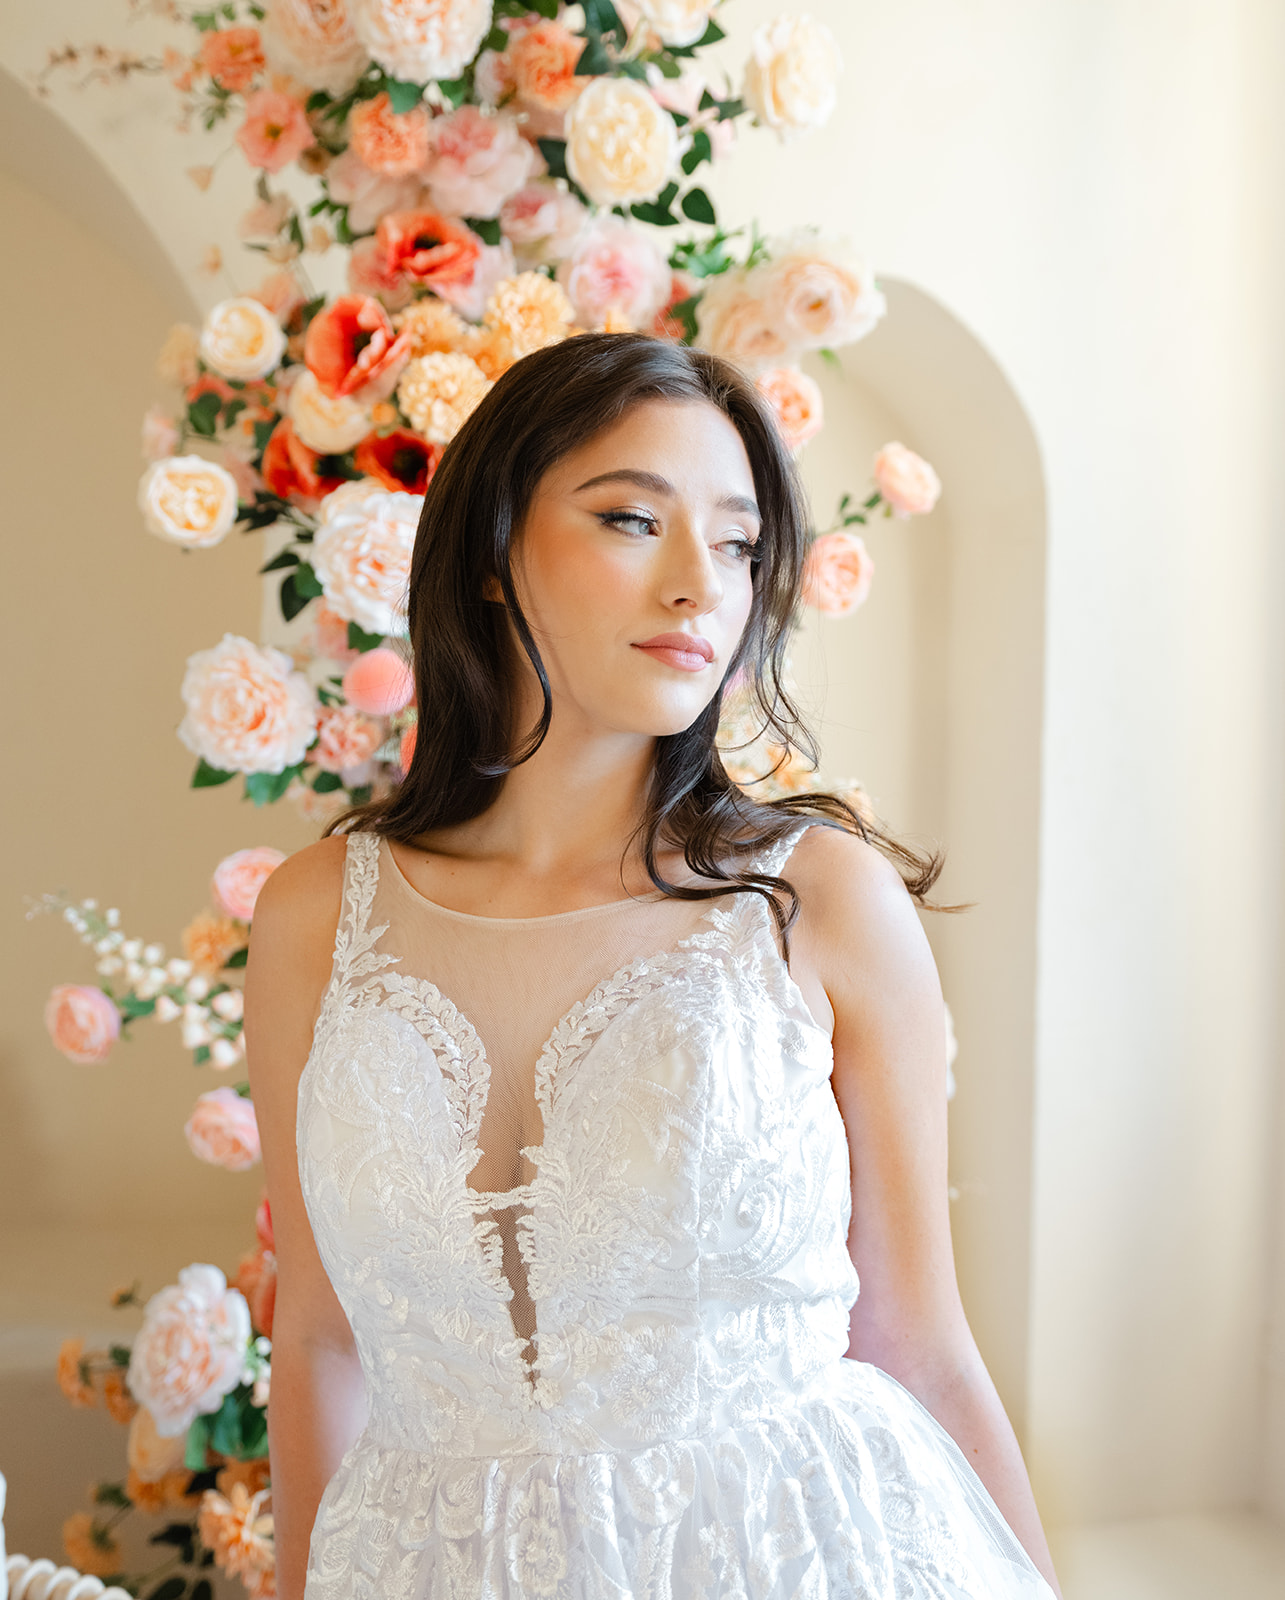 Klara: A captivating wedding gown with an illusion front and exquisite lace embroidery, available for rental in Toronto. Experience timeless elegance for your special day